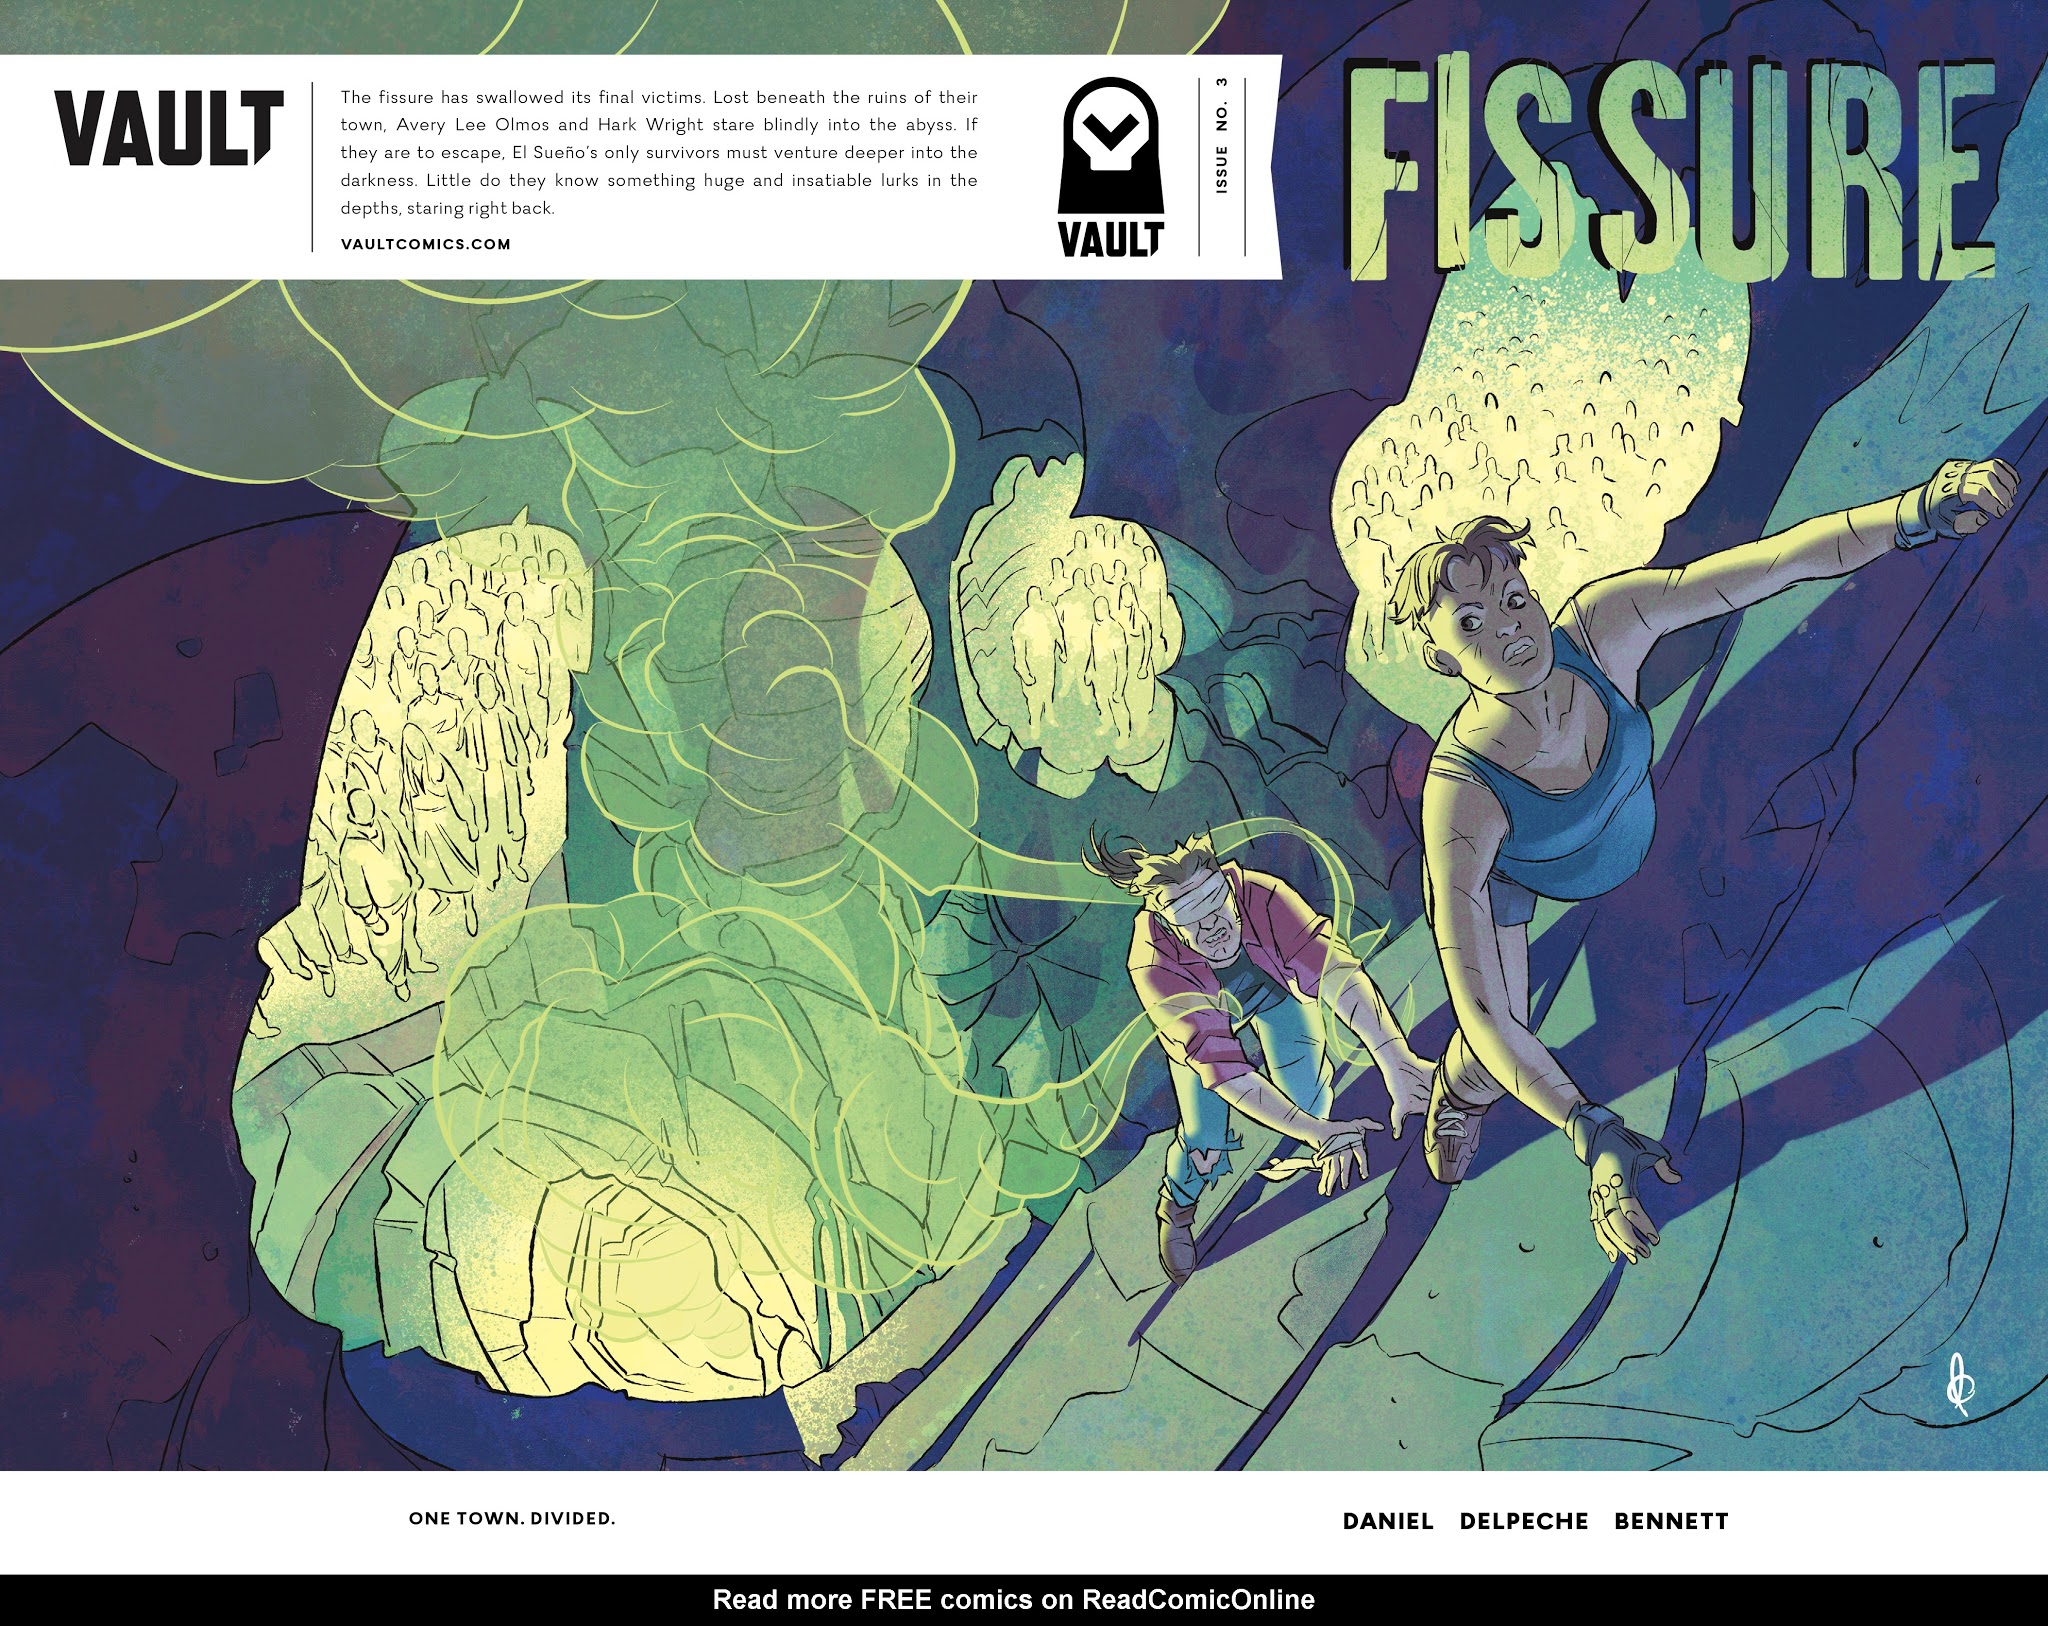 Read online Fissure comic -  Issue #3 - 1